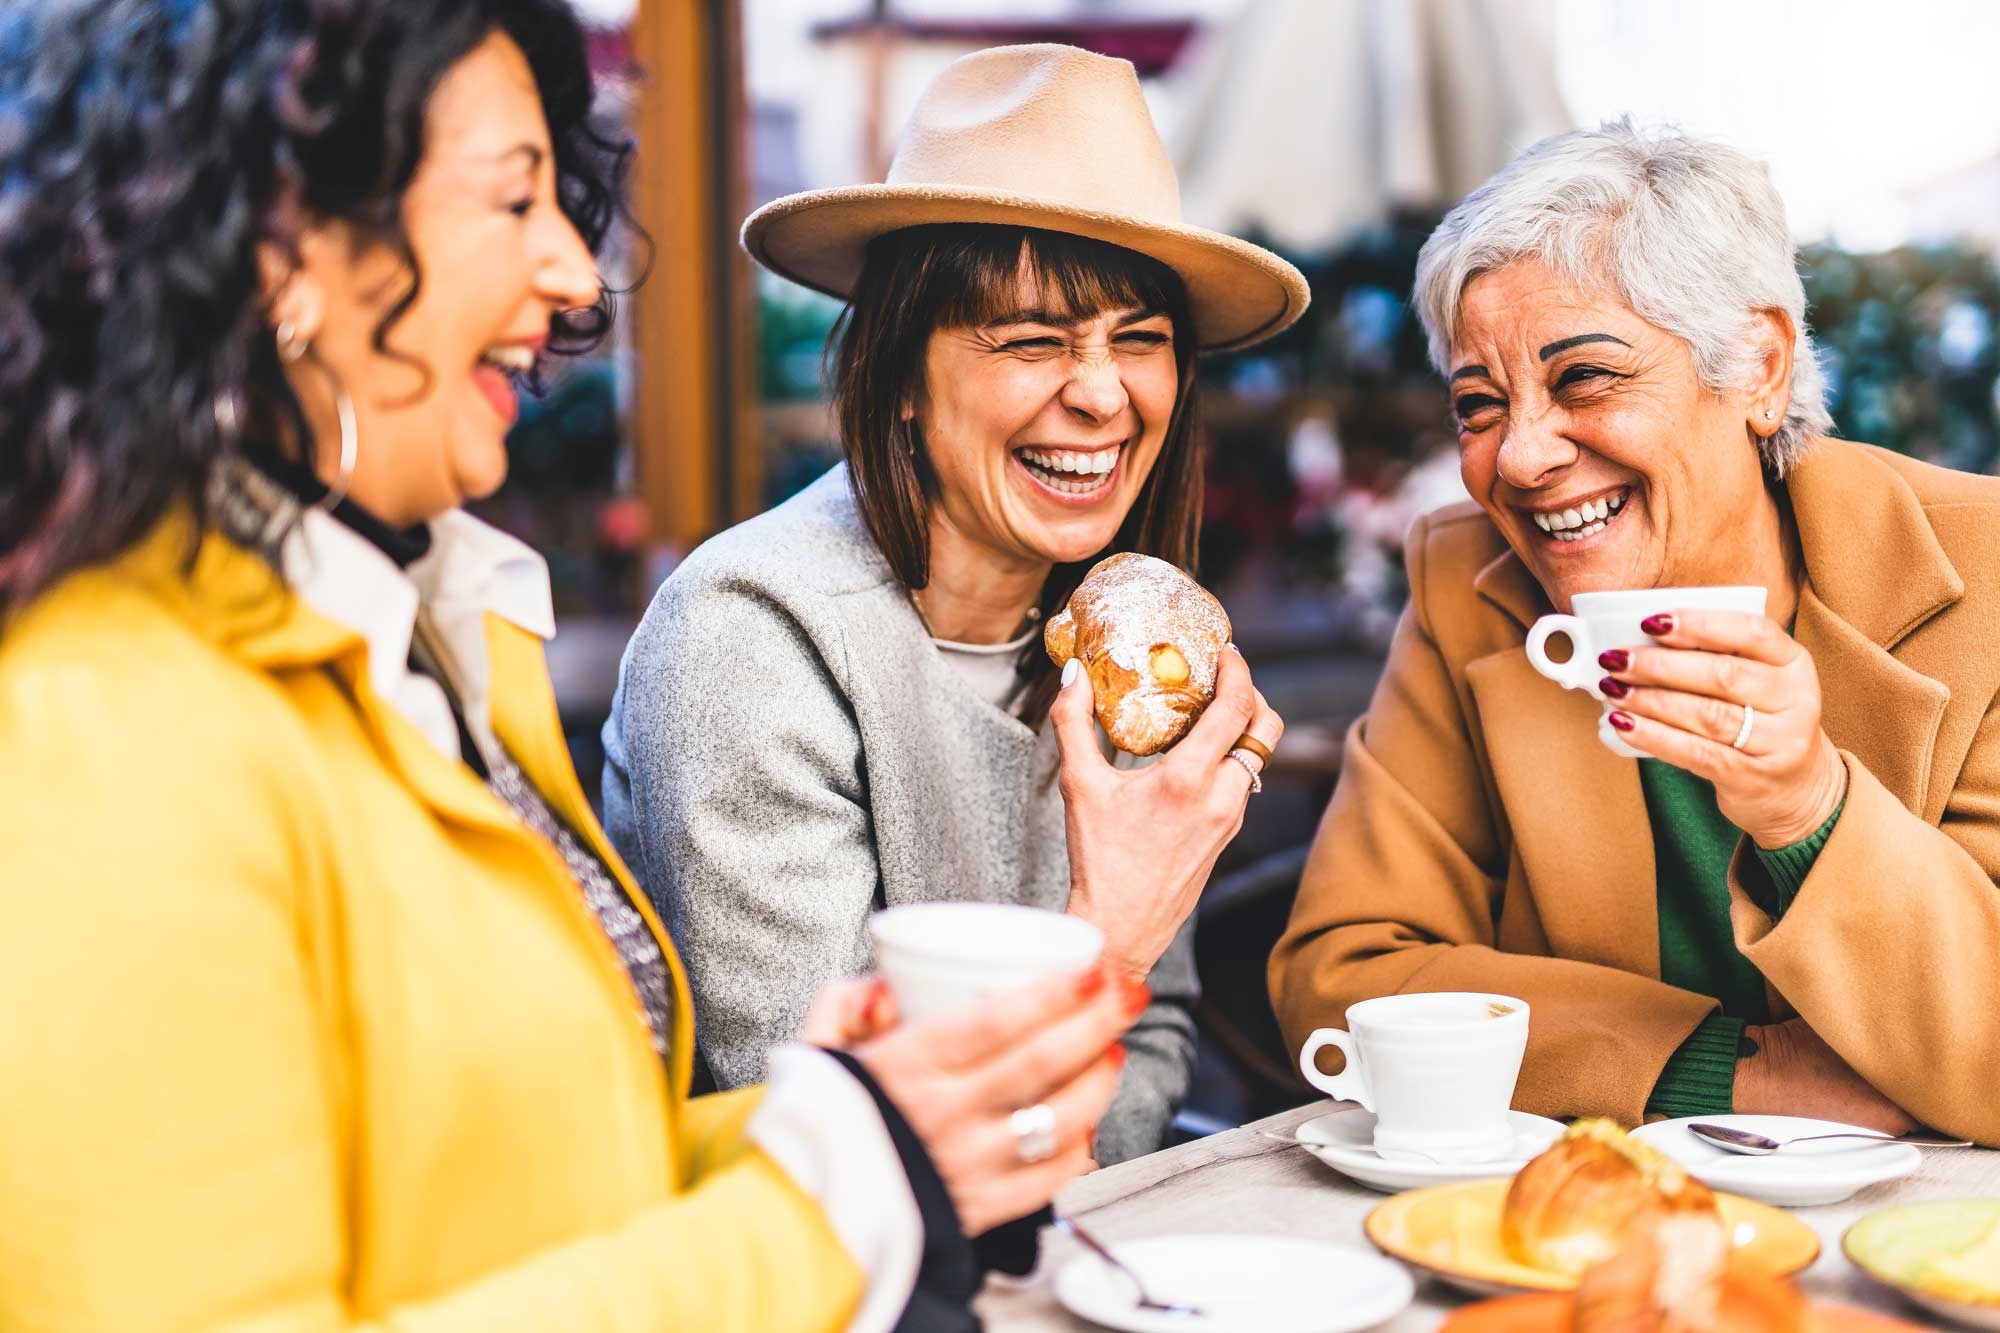 Three women getting together at a cafe, laughing and feeling good